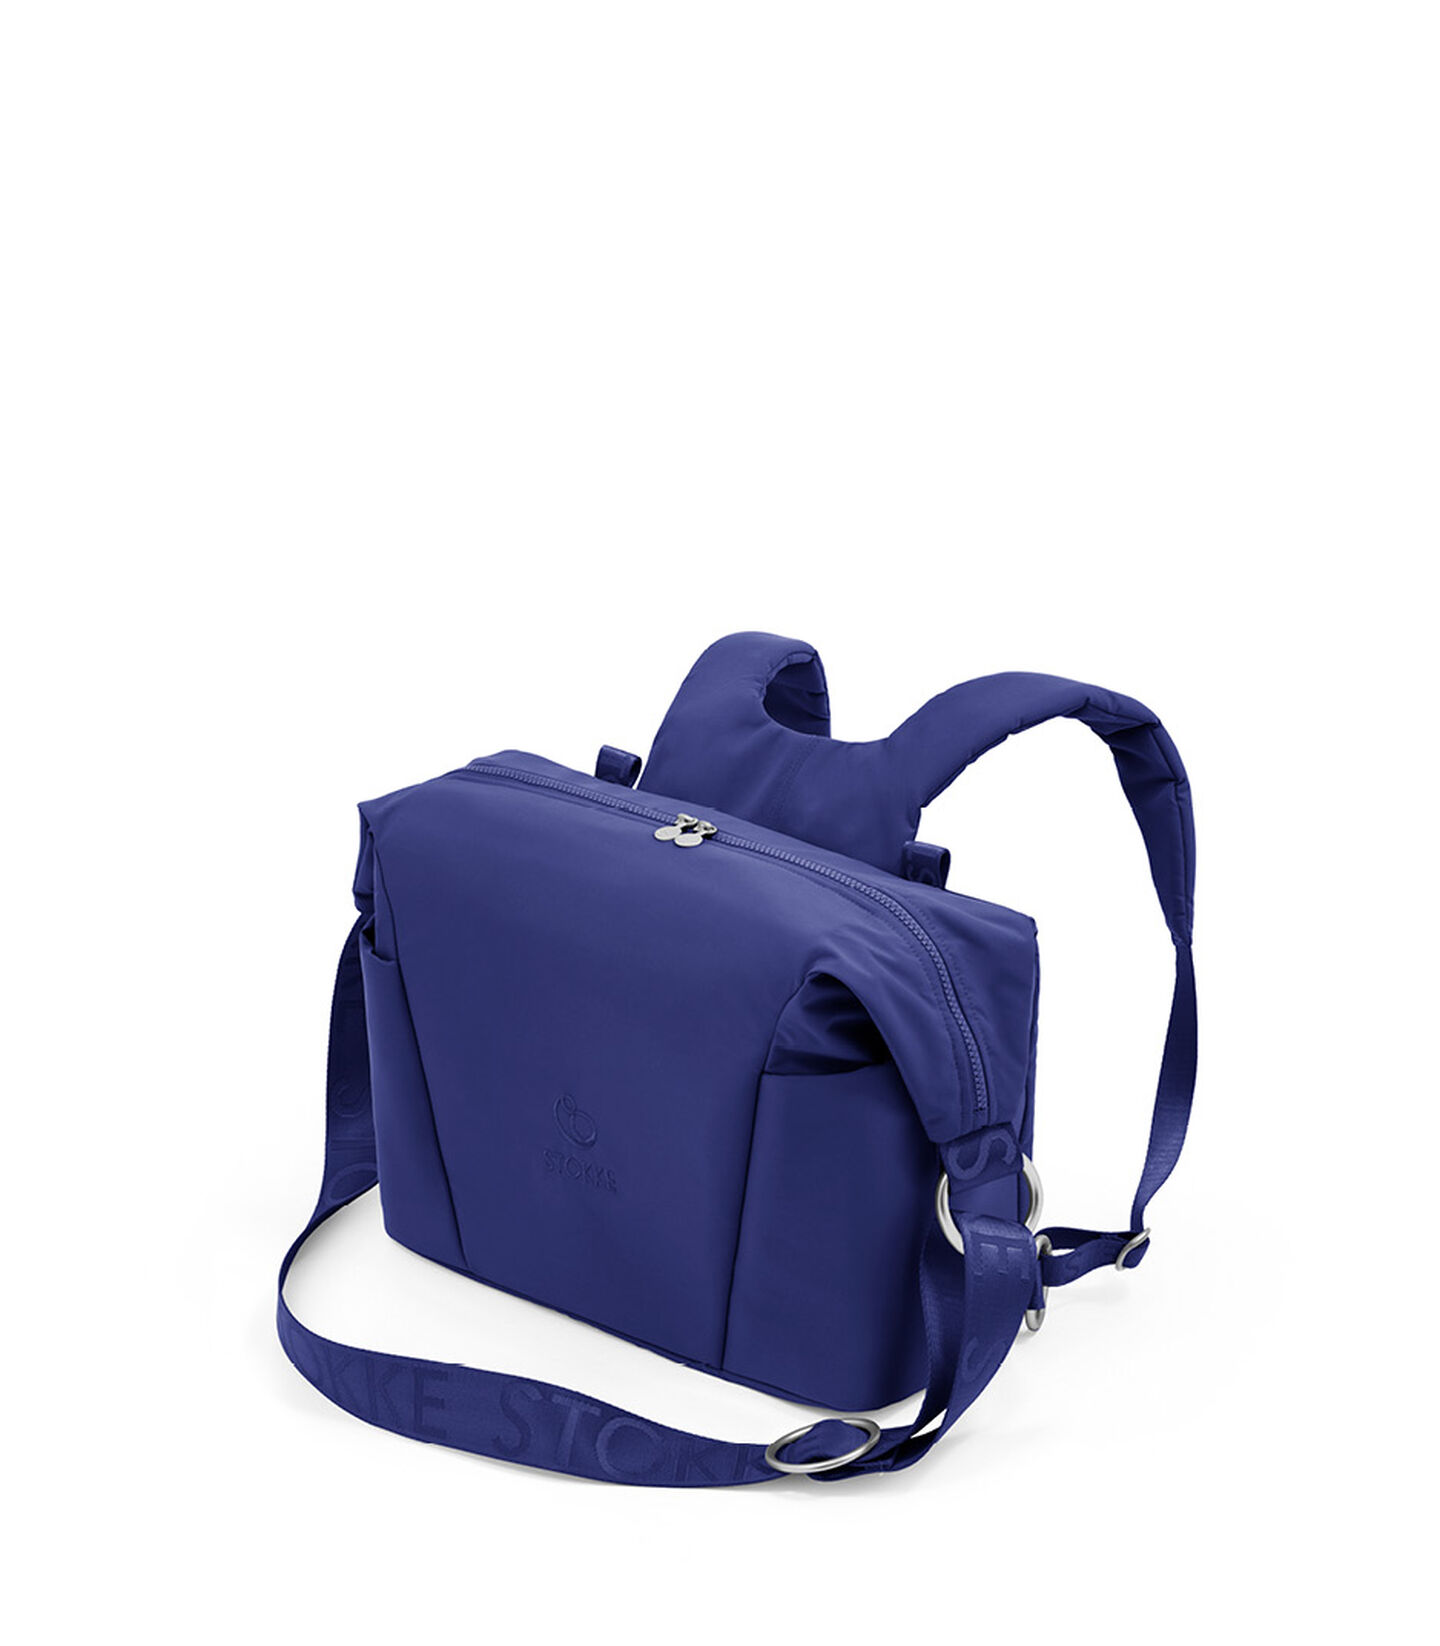 Stokke® Xplory® X Wickeltasche Royal Blue, Royal Blue, mainview view 1